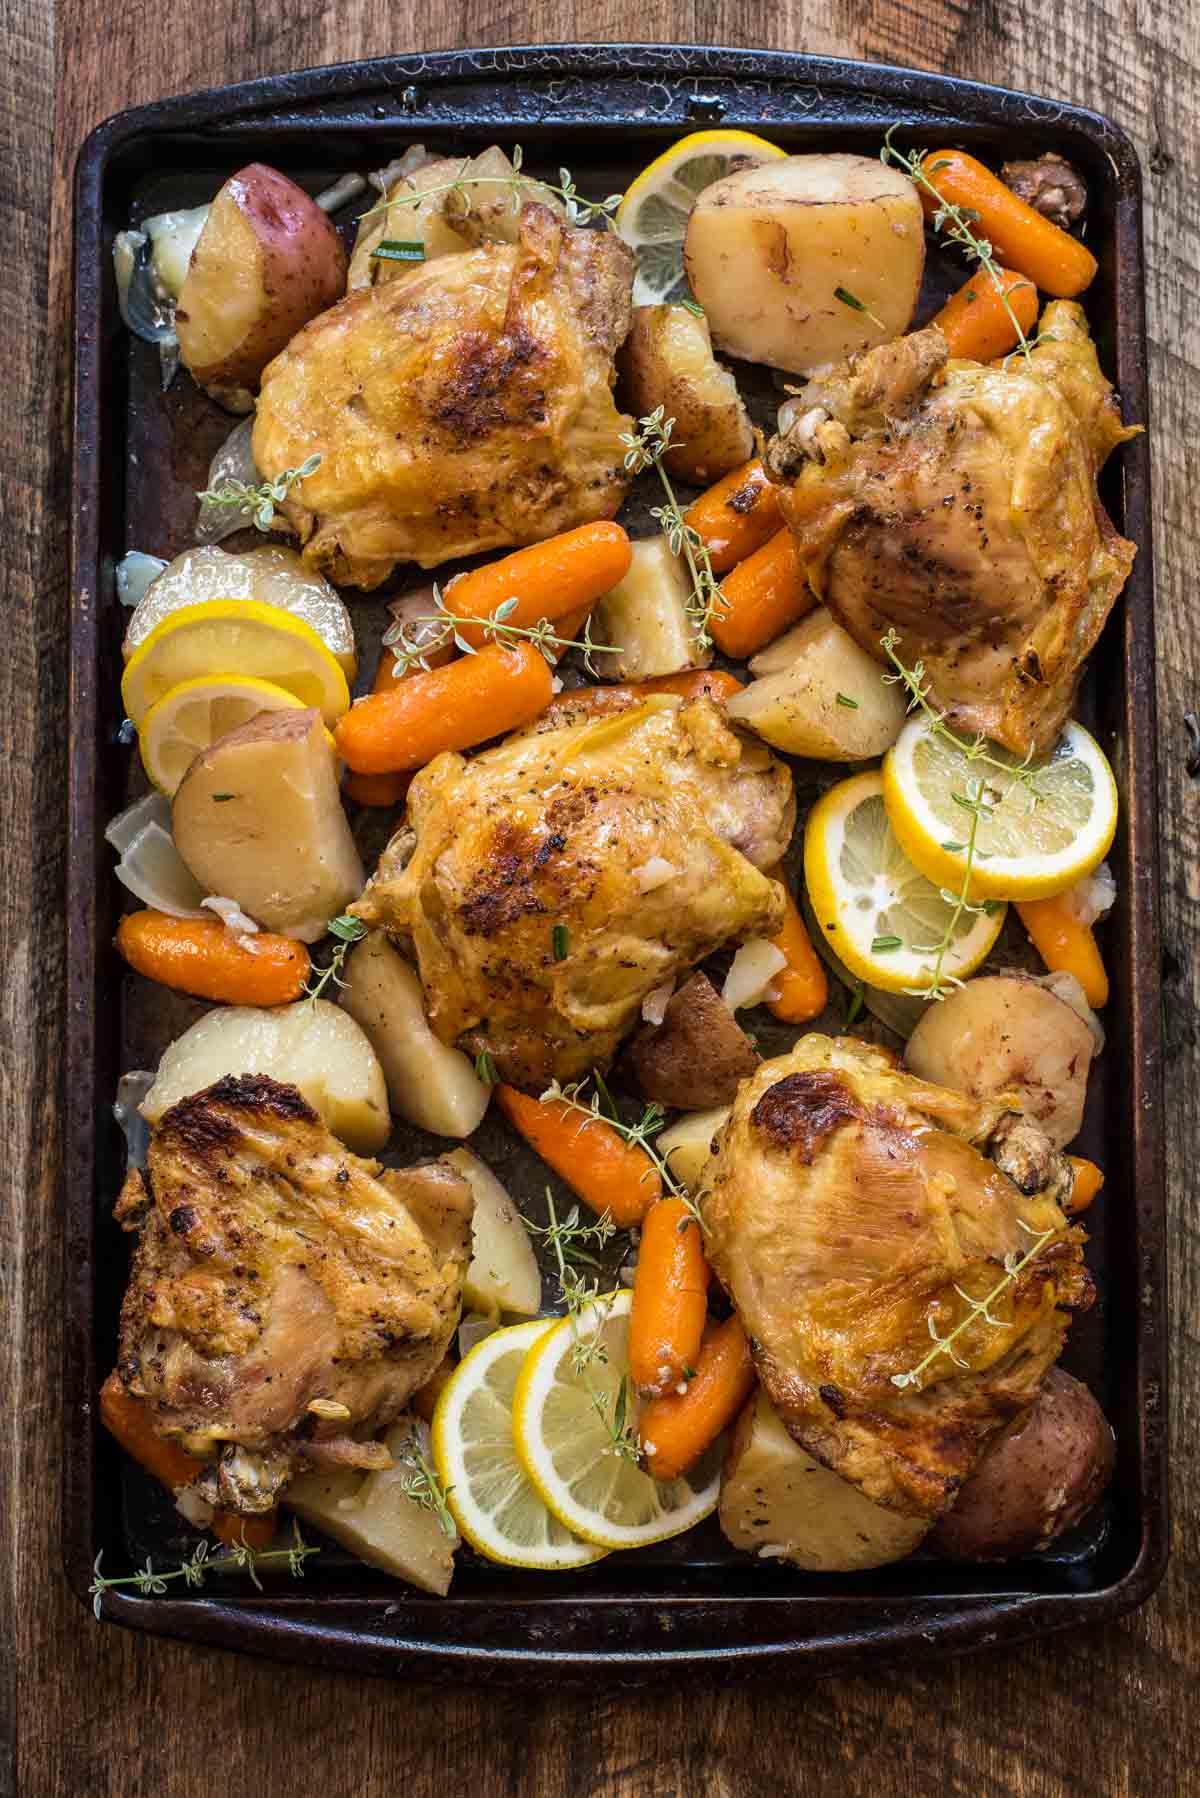 This Crock Pot Lemon Garlic Chicken is a ridiculously easy one-pot meal the whole family will love.